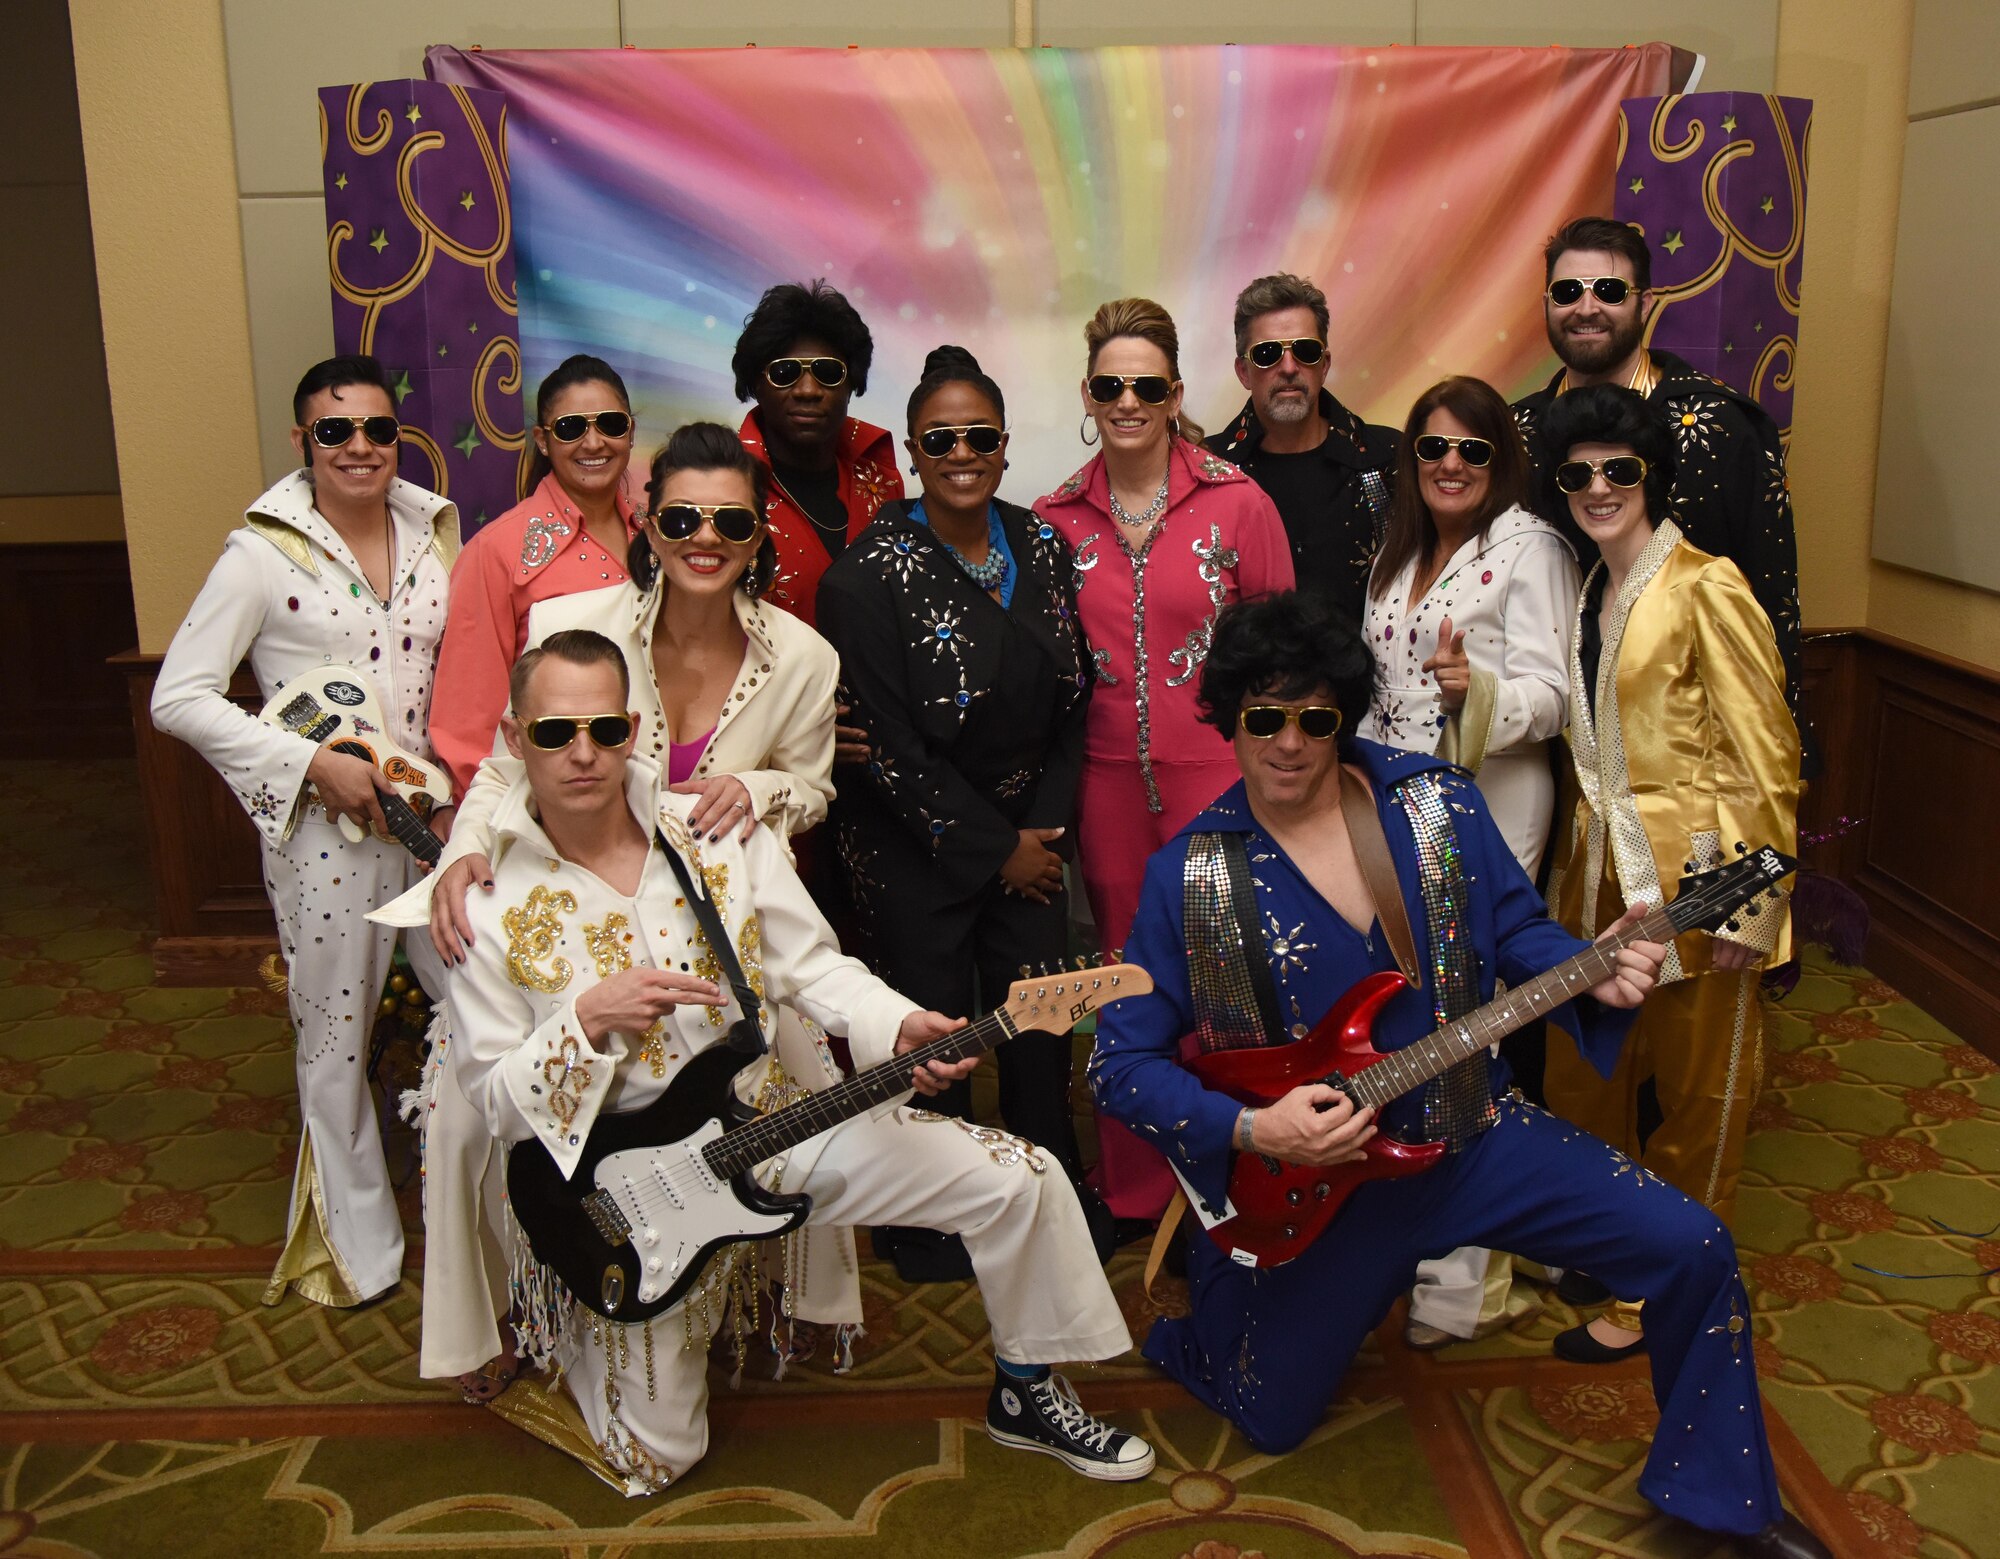 Col. Michele Edmondson , 81st Training Wing commander, members of the 81st TRW command staff and their spouses, dressed as Elvis, pose for a group photo at the 29th Annual Krewe of Medics Mardi Gras Ball at the Bay Breeze Event Center Jan. 28, 2017, on Keesler Air Force Base, Miss. The Krewe of Medics hosts a yearly ball to give Keesler Medical Center personnel a taste of the Gulf Coast and an opportunity to experience a traditional Mardi Gras. The theme for this year's ball was Blast From The Past. (U.S. Air Force photo by Kemberly Groue)